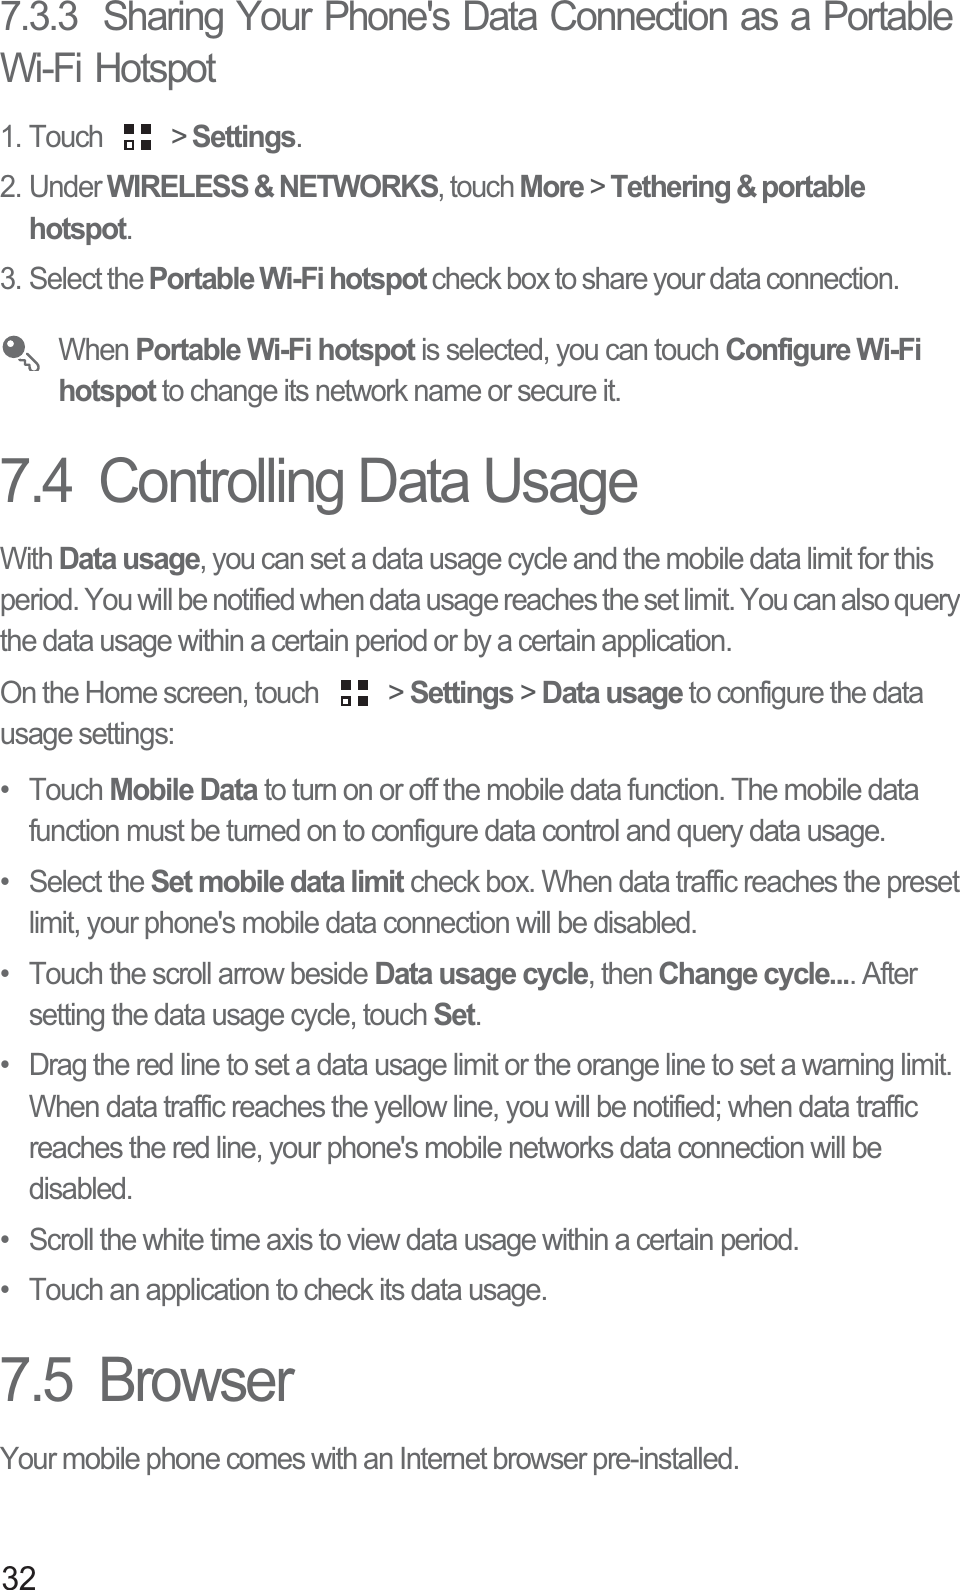 327.3.3  Sharing Your Phone&apos;s Data Connection as a Portable Wi-Fi Hotspot1. Touch   &gt; Settings.2. Under WIRELESS &amp; NETWORKS, touch More &gt; Tethering &amp; portable hotspot. 3. Select the Portable Wi-Fi hotspot check box to share your data connection. When Portable Wi-Fi hotspot is selected, you can touch Configure Wi-Fi hotspot to change its network name or secure it.7.4  Controlling Data UsageWith Data usage, you can set a data usage cycle and the mobile data limit for this period. You will be notified when data usage reaches the set limit. You can also query the data usage within a certain period or by a certain application. On the Home screen, touch   &gt; Settings &gt; Data usage to configure the data usage settings: • Touch Mobile Data to turn on or off the mobile data function. The mobile data function must be turned on to configure data control and query data usage. • Select the Set mobile data limit check box. When data traffic reaches the preset limit, your phone&apos;s mobile data connection will be disabled. •  Touch the scroll arrow beside Data usage cycle, then Change cycle.... After setting the data usage cycle, touch Set.•  Drag the red line to set a data usage limit or the orange line to set a warning limit. When data traffic reaches the yellow line, you will be notified; when data traffic reaches the red line, your phone&apos;s mobile networks data connection will be disabled.•  Scroll the white time axis to view data usage within a certain period. •  Touch an application to check its data usage.7.5  BrowserYour mobile phone comes with an Internet browser pre-installed.